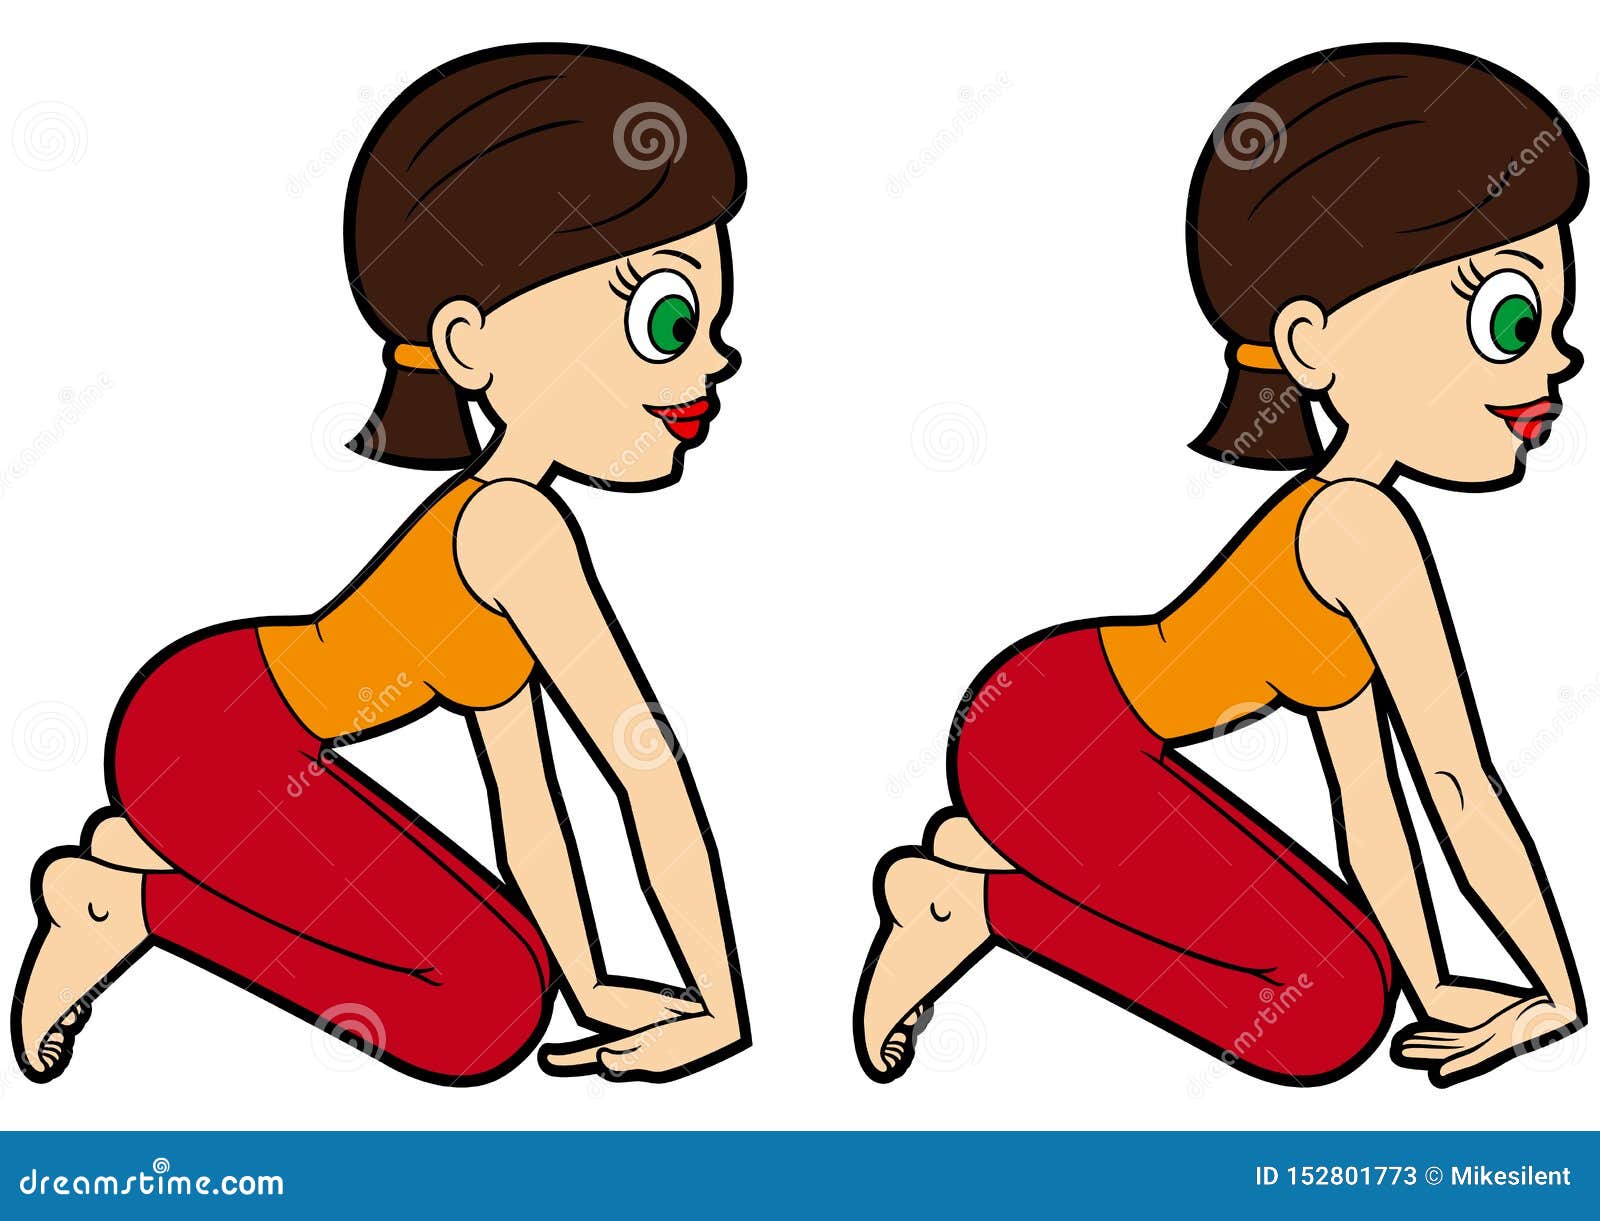 Arm Workout Stretches Stock Illustrations – 60 Arm Workout